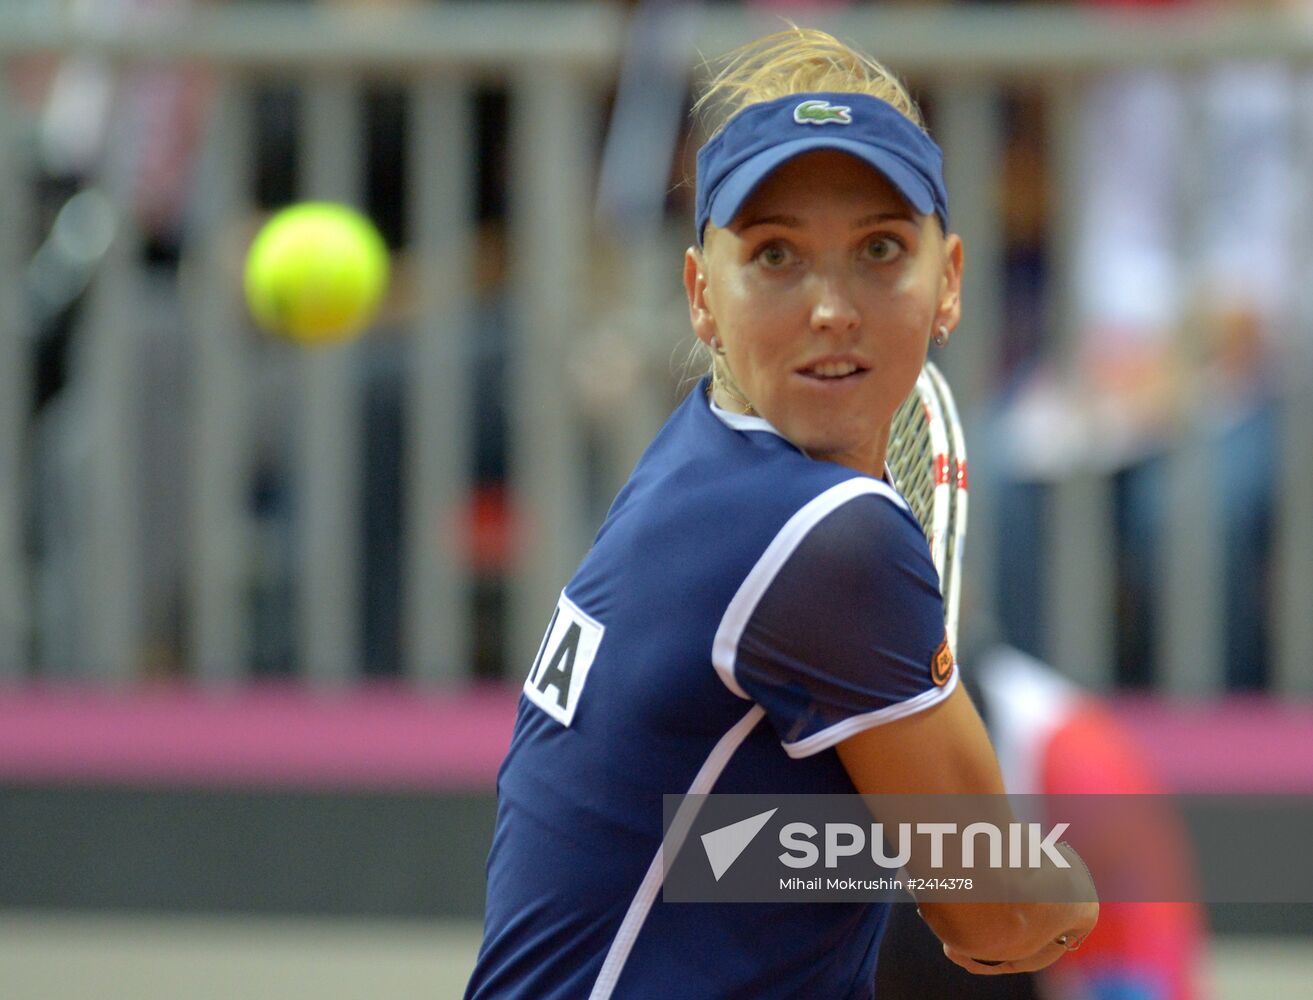 Fed Cup 2014. Russia vs. Argentina. Day One